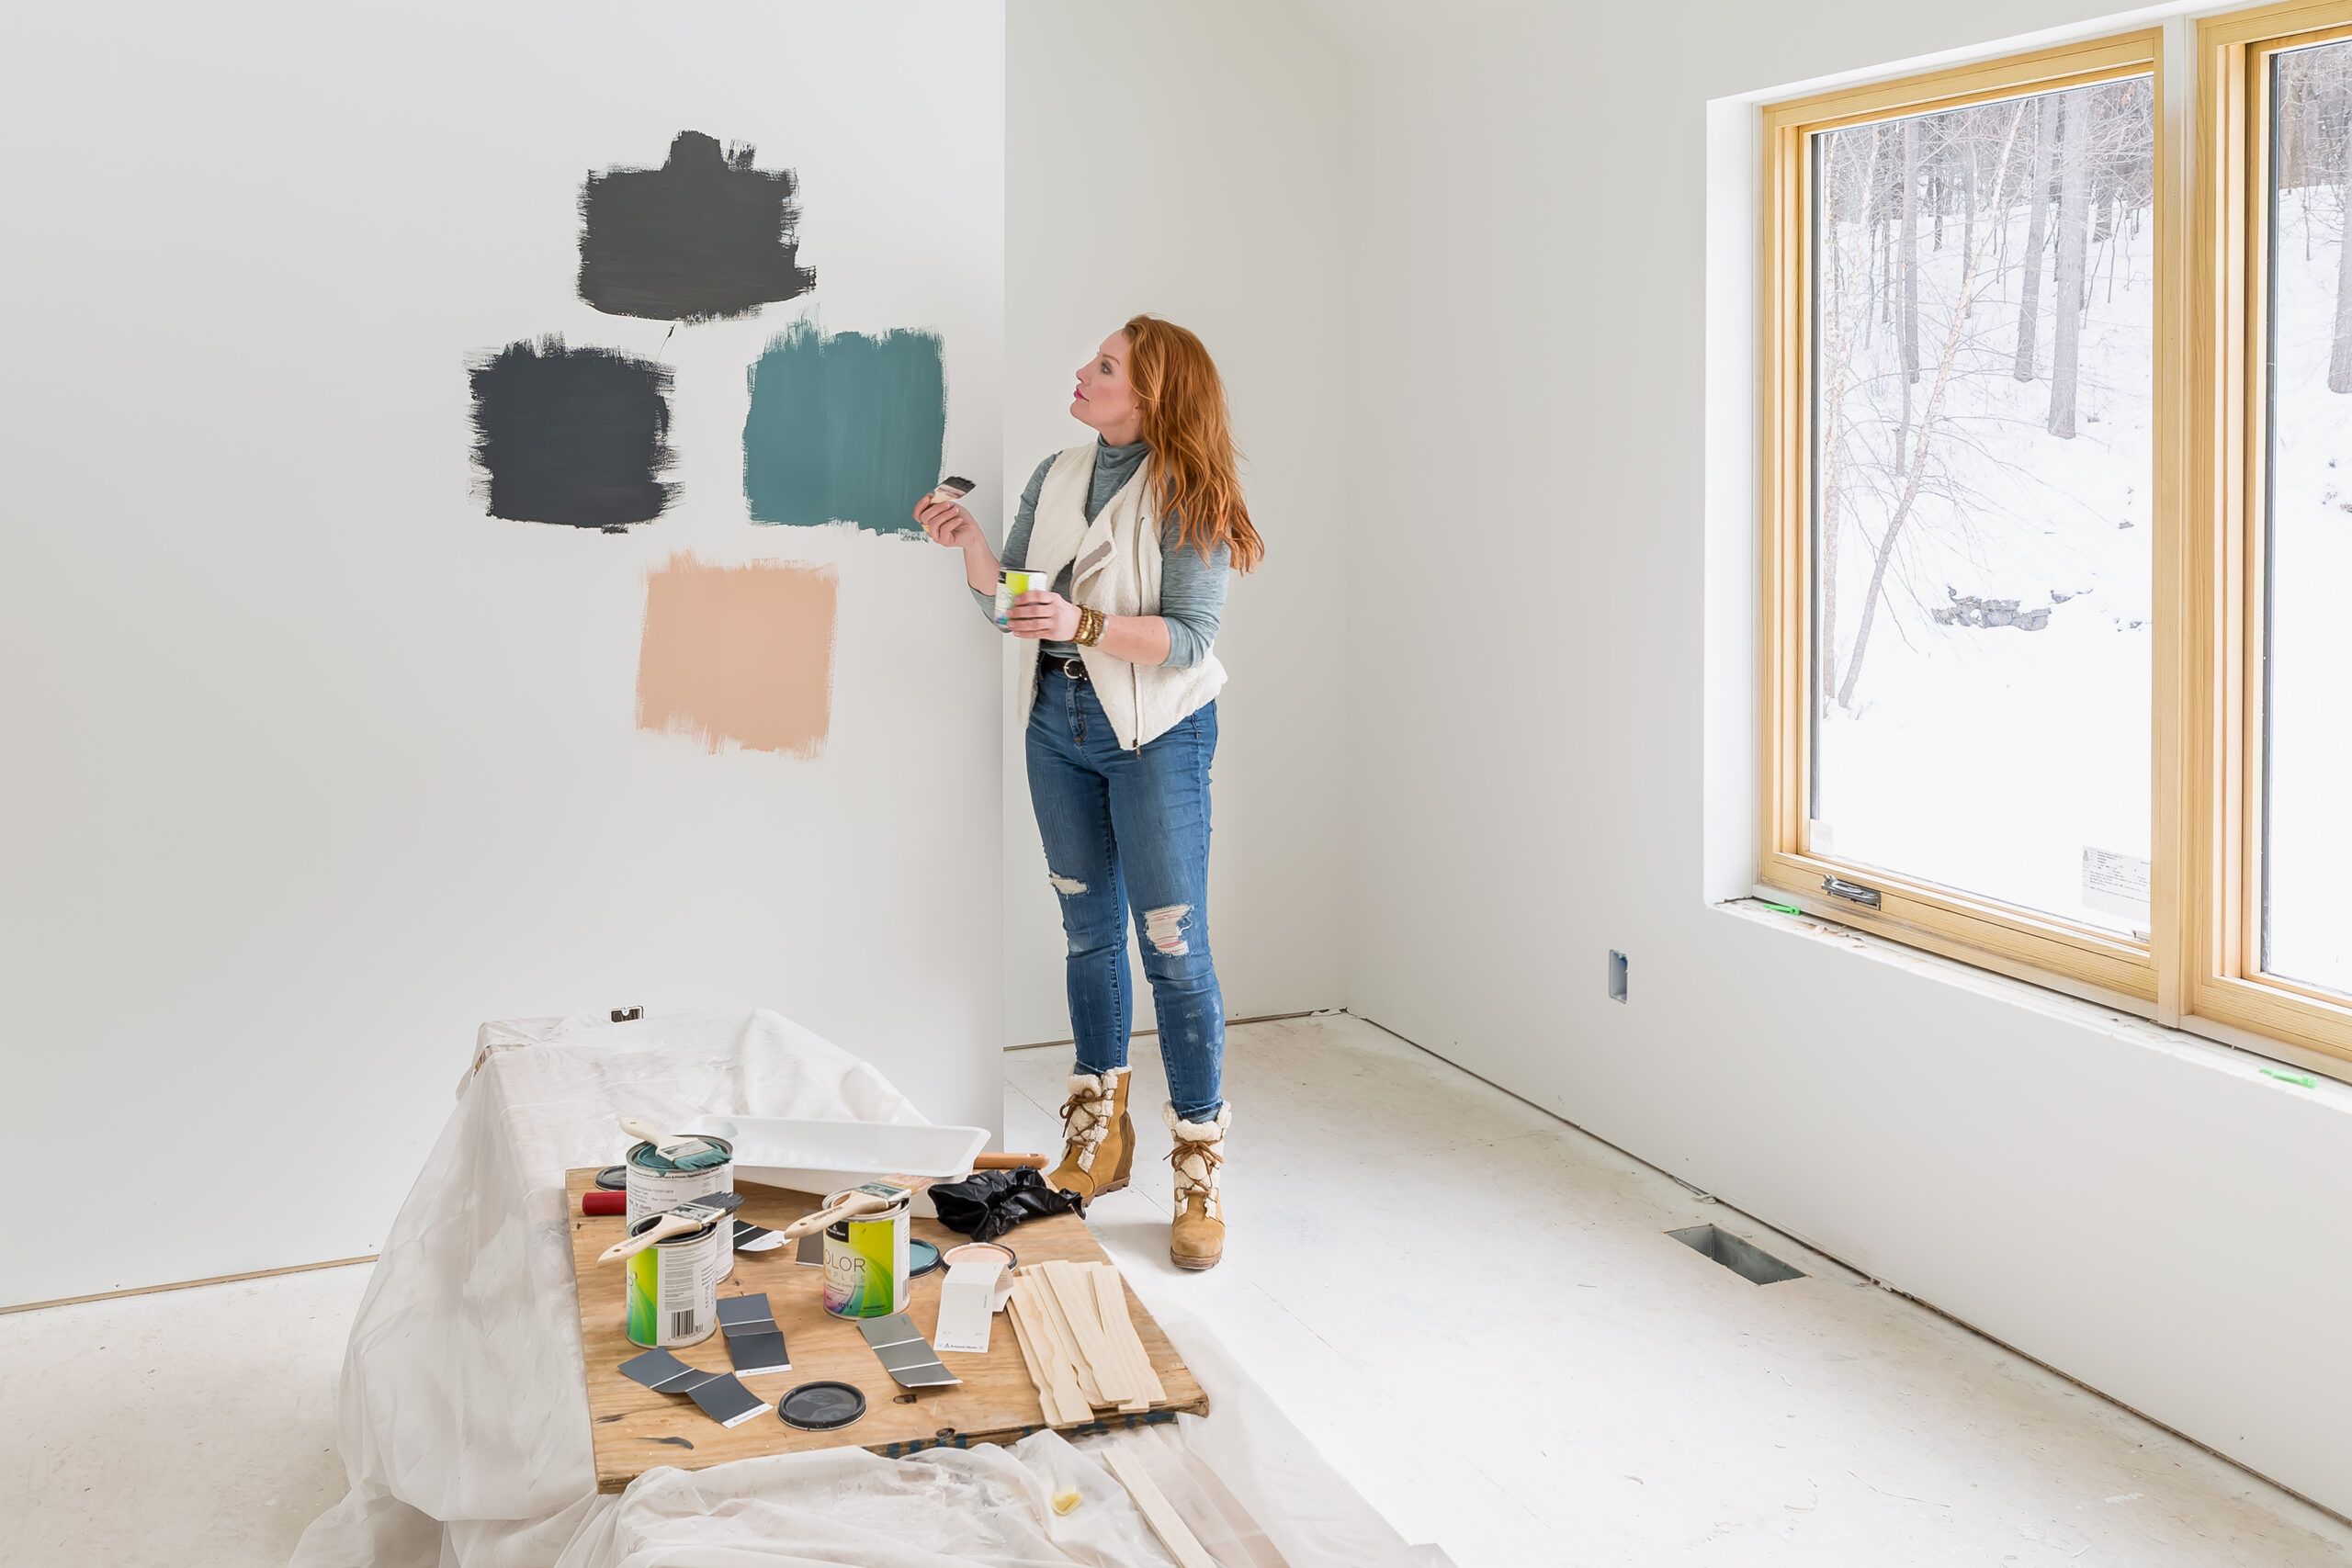 10 Best Interior Paint Colors For 2019 - re:fab